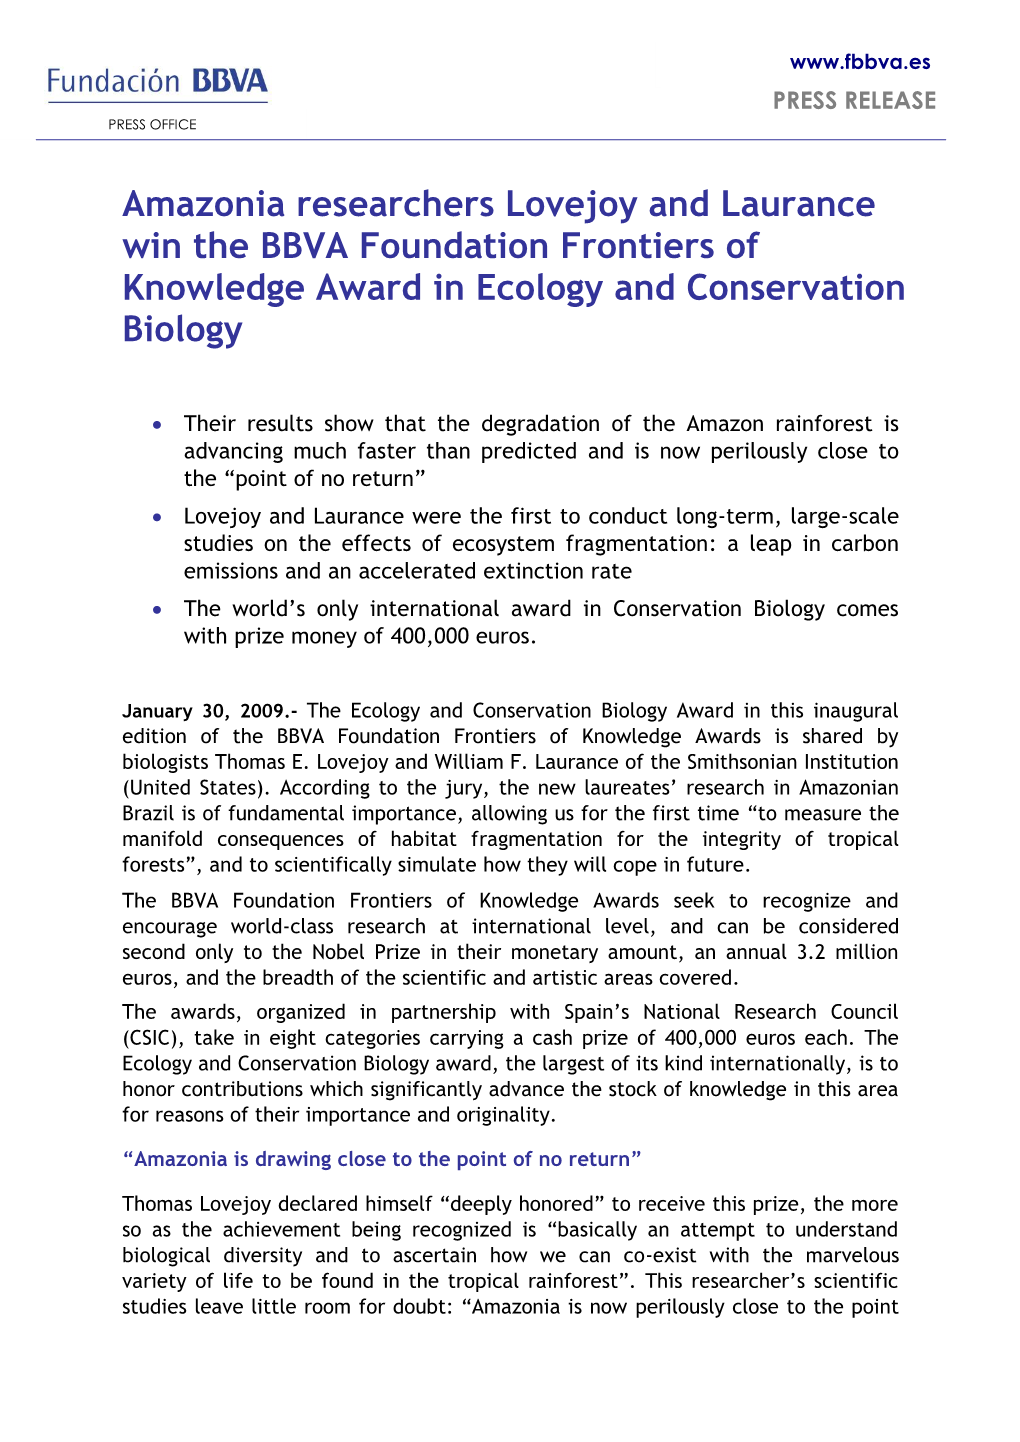 Amazonia Researchers Lovejoy and Laurance Win the BBVA Foundation Frontiers of Knowledge Award in Ecology and Conservation Biology